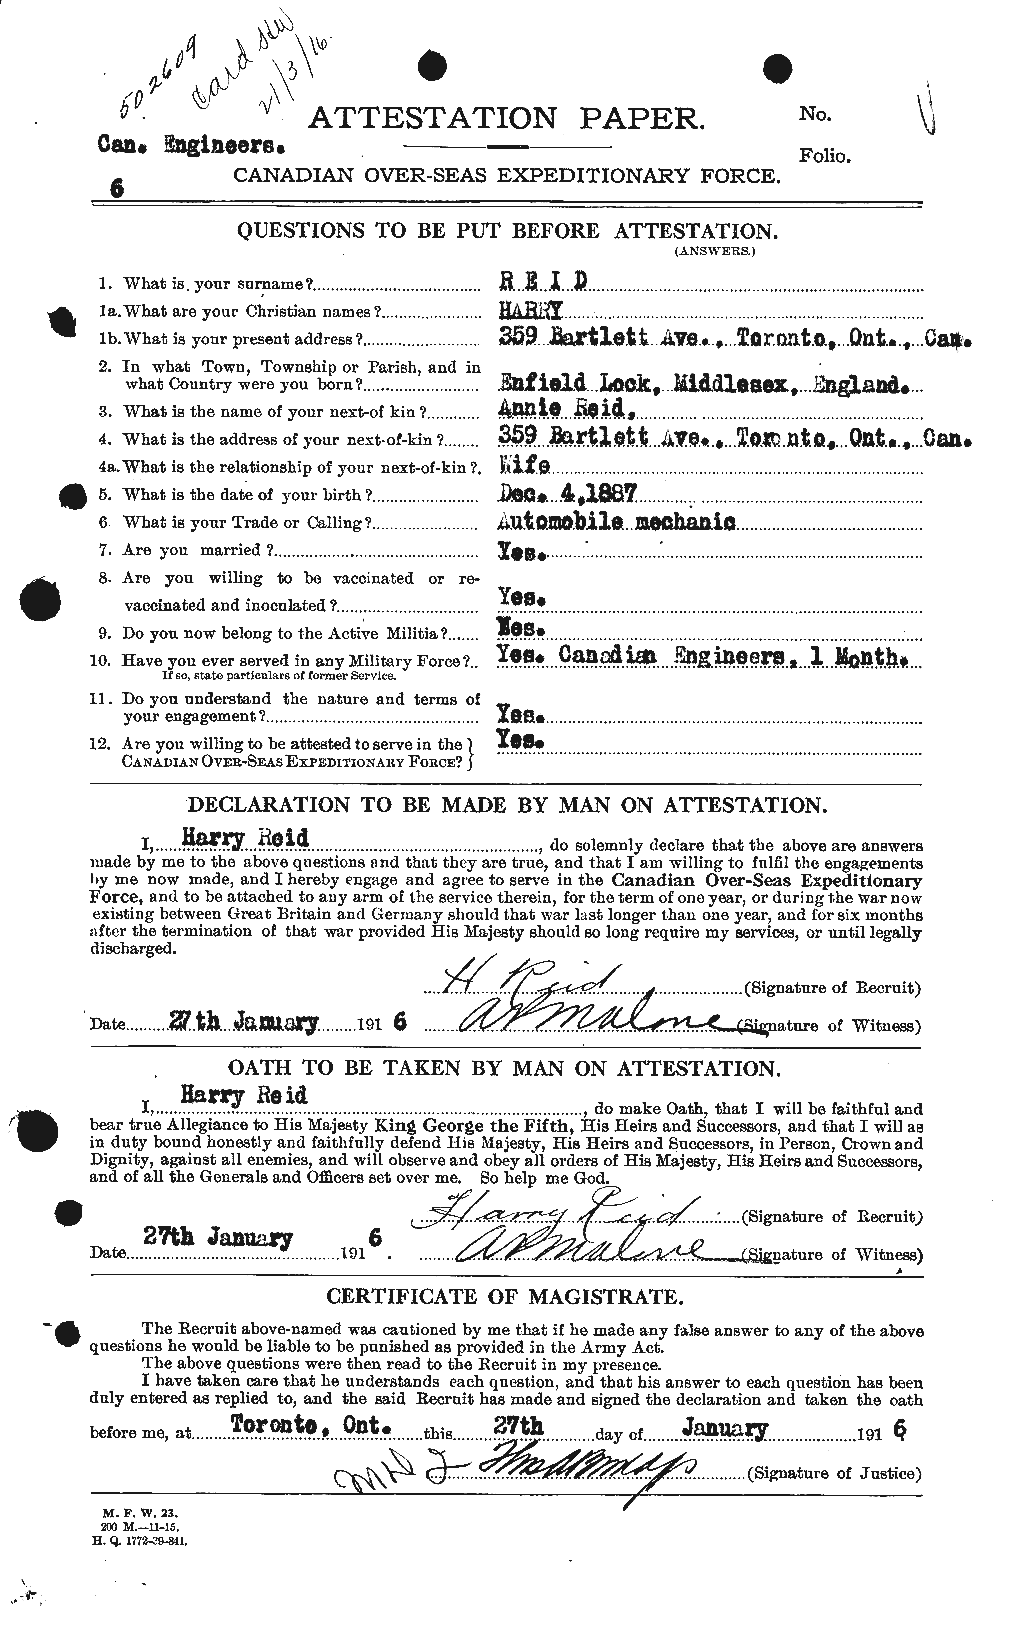 Personnel Records of the First World War - CEF 598575a